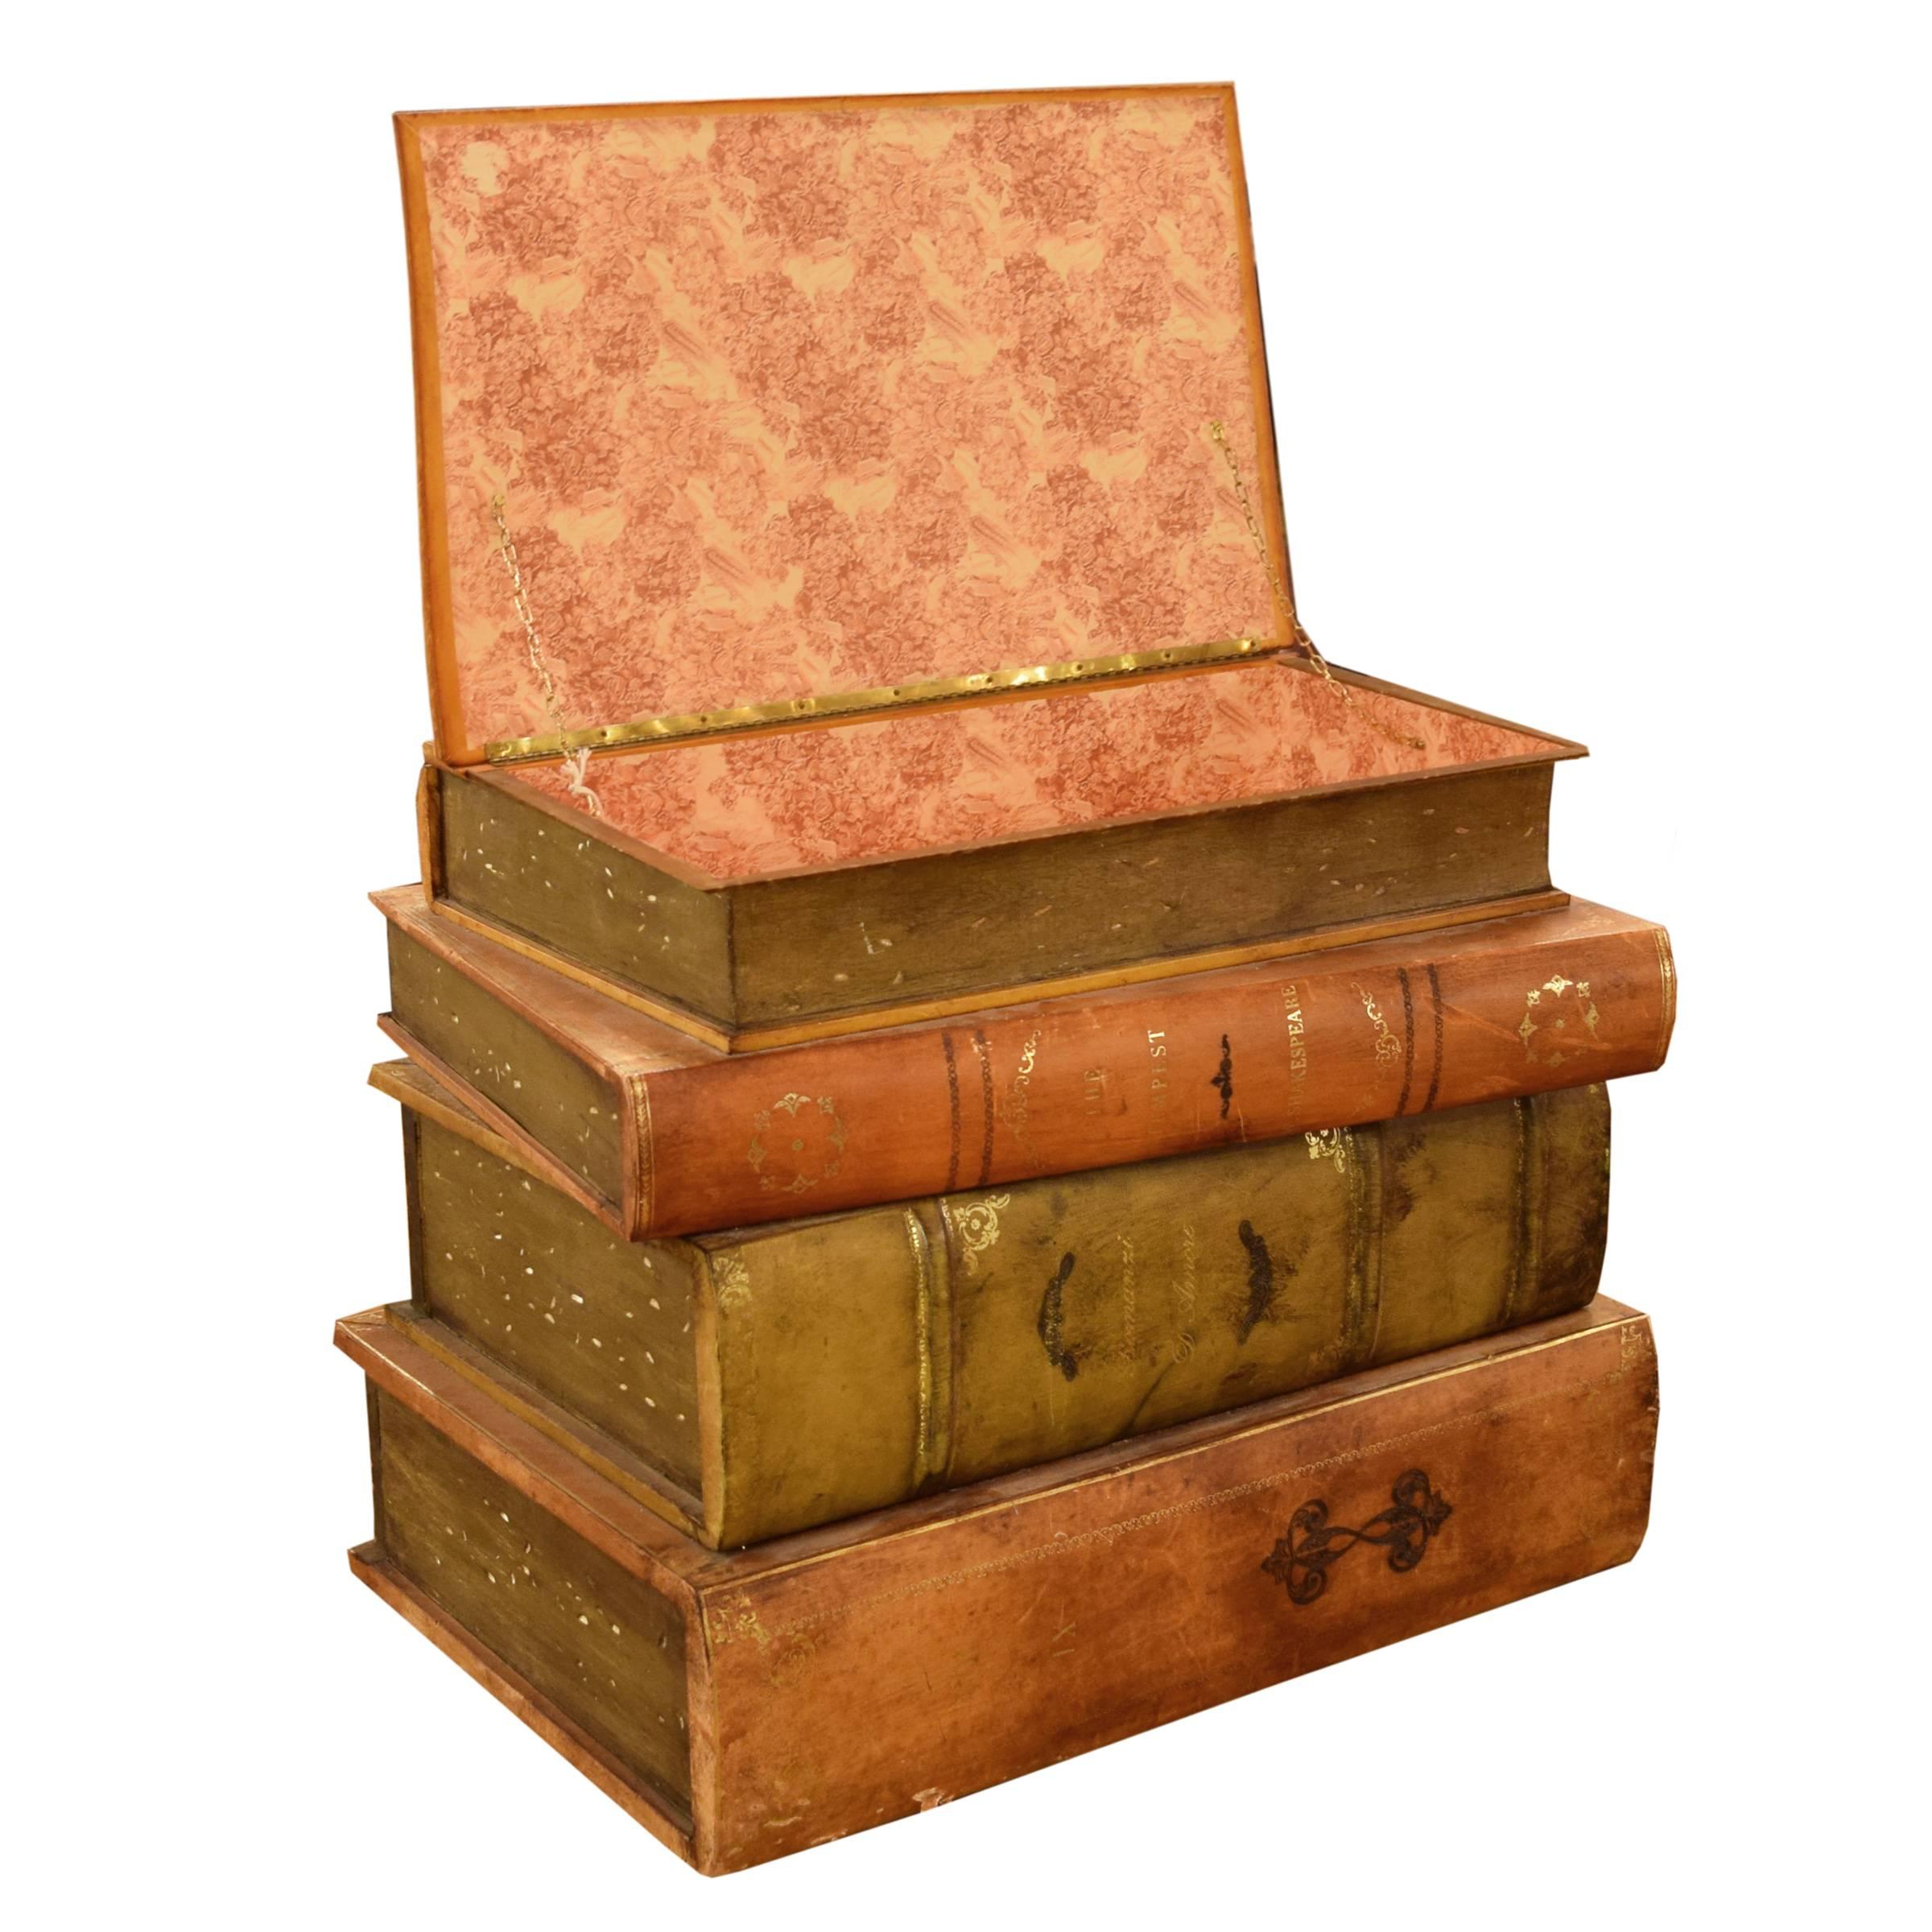 A German leather bound book stack storage safe with two hidden drawers and a top compartment lined with red floral paper. The top book is titled “Platone Scriptum”, Plato’s writings, circa 1970.